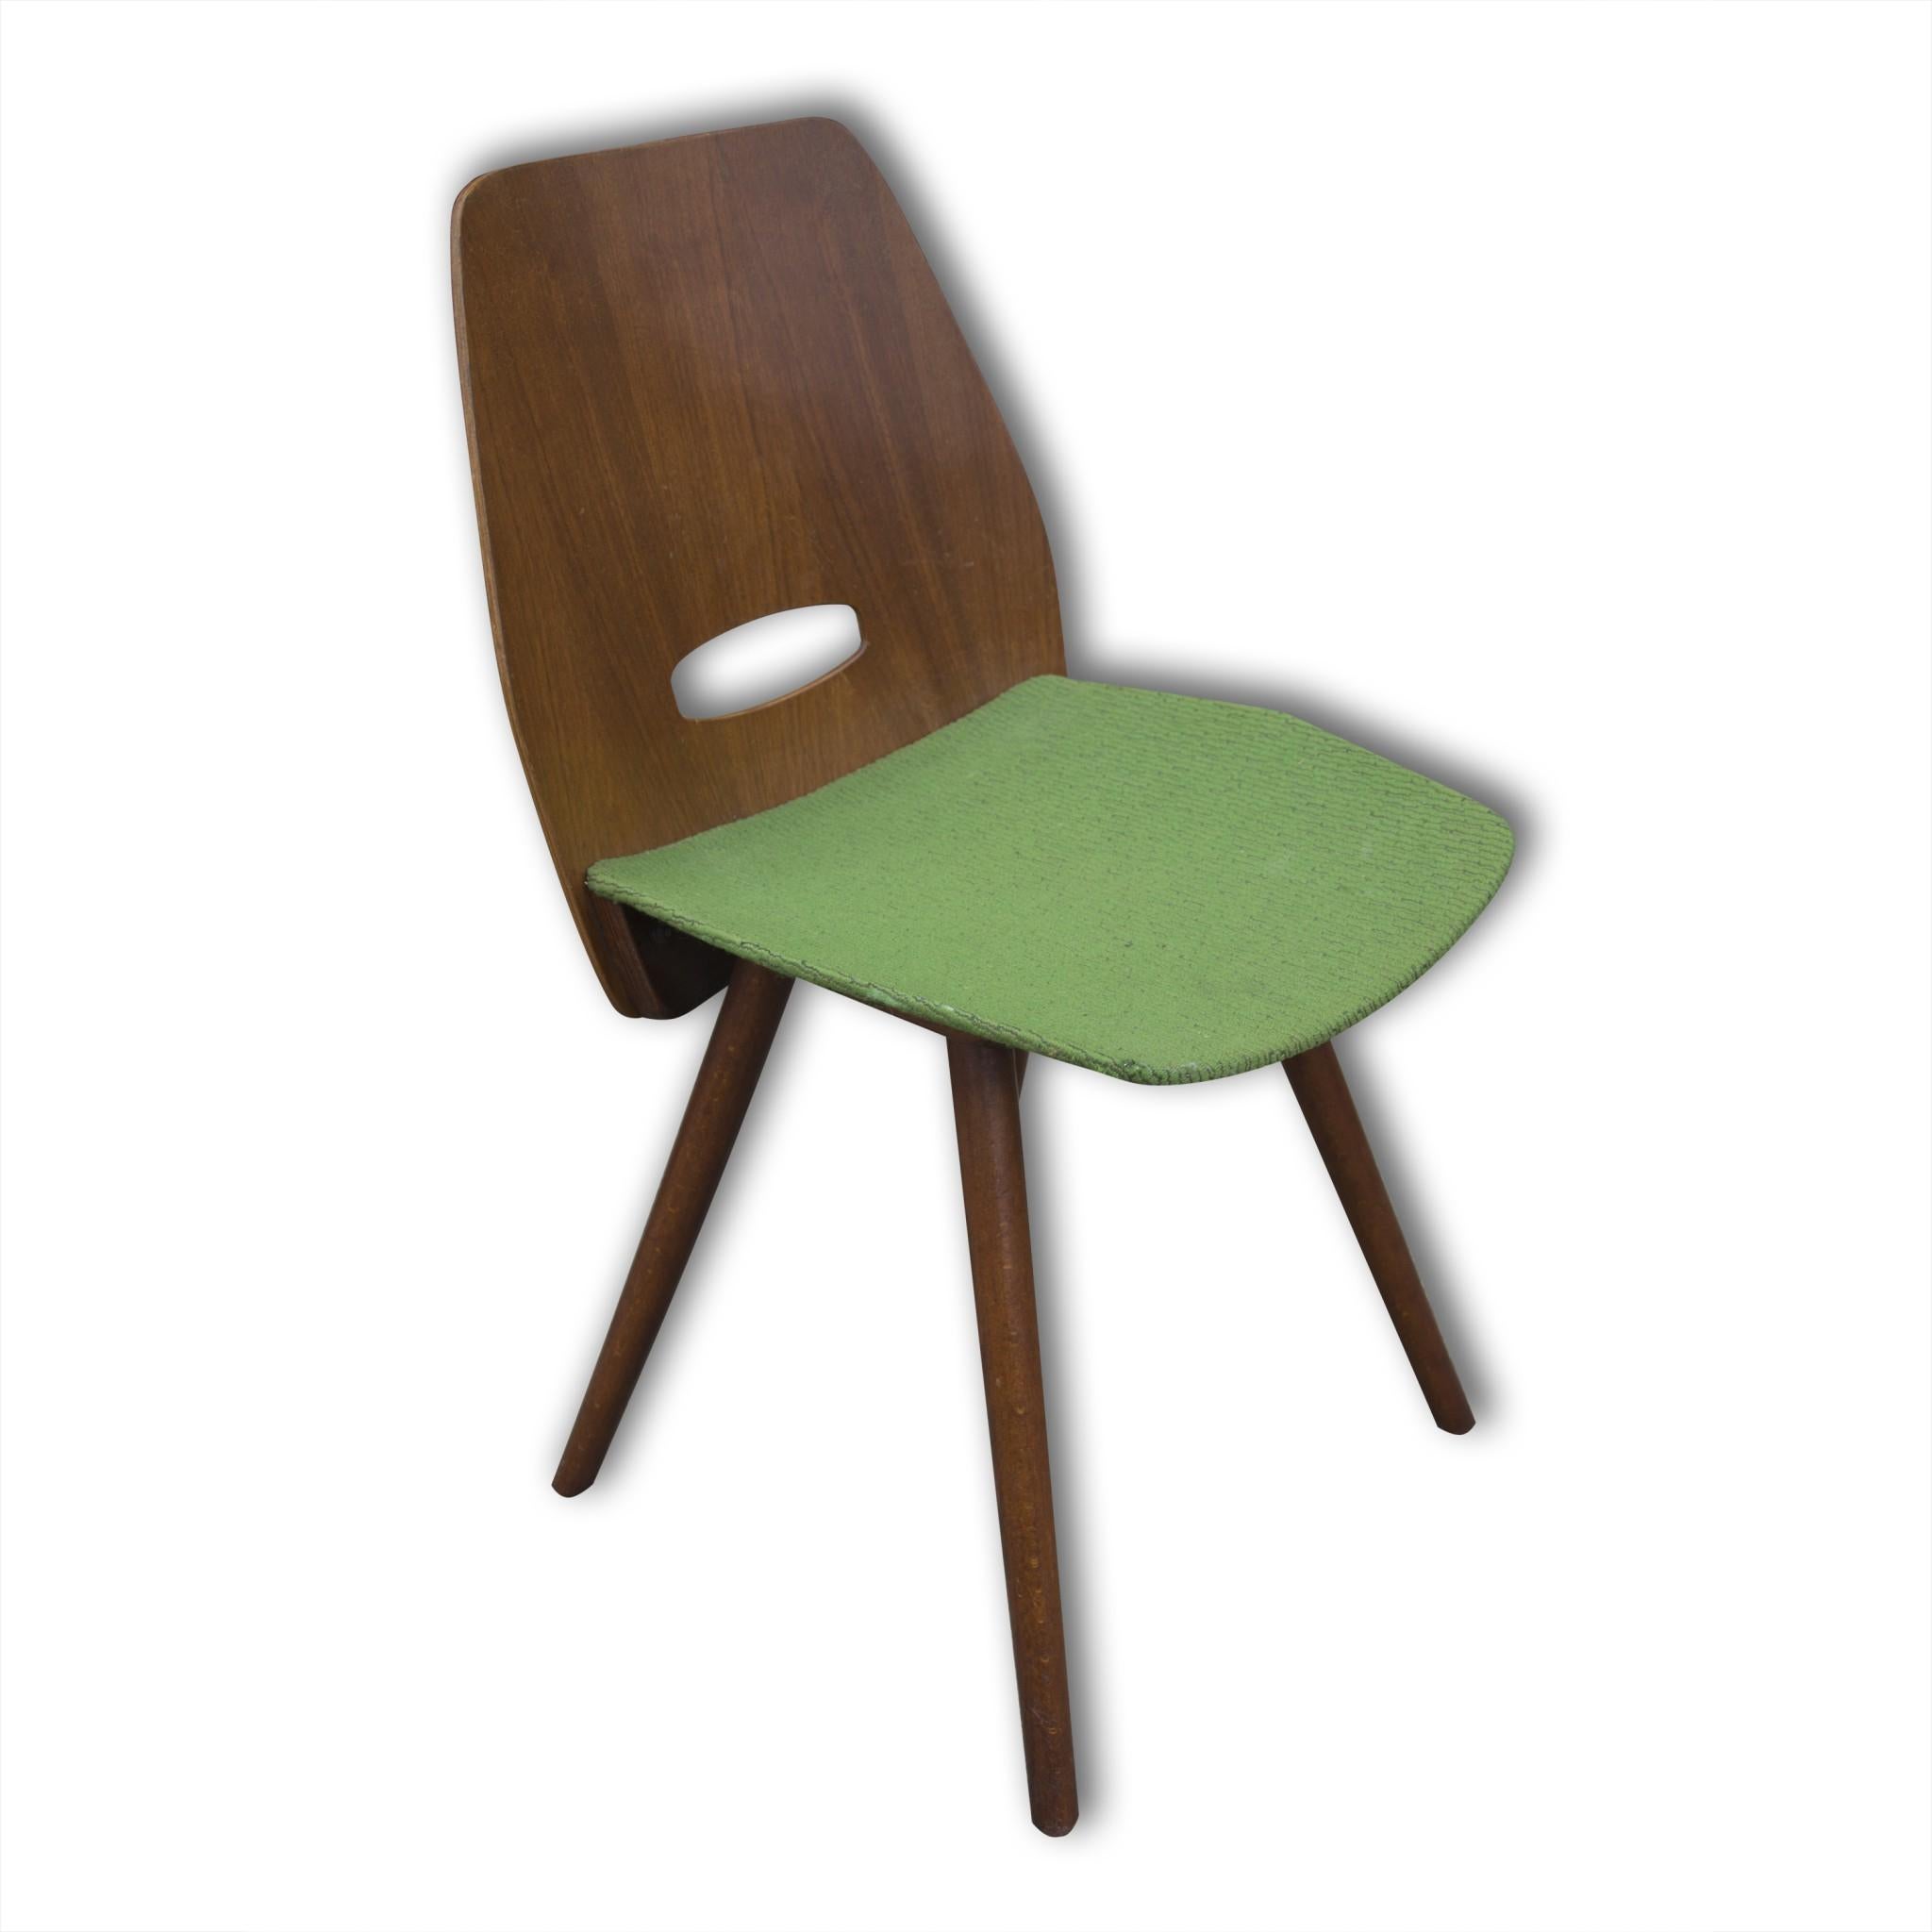 Midcentury beechwood chairs by Frantisek Jirak, Czechoslovakia.

Seats are upholstered by green suede fabric. Fabric is in good Vintage condition without any damage. Price is for the set of four.

 